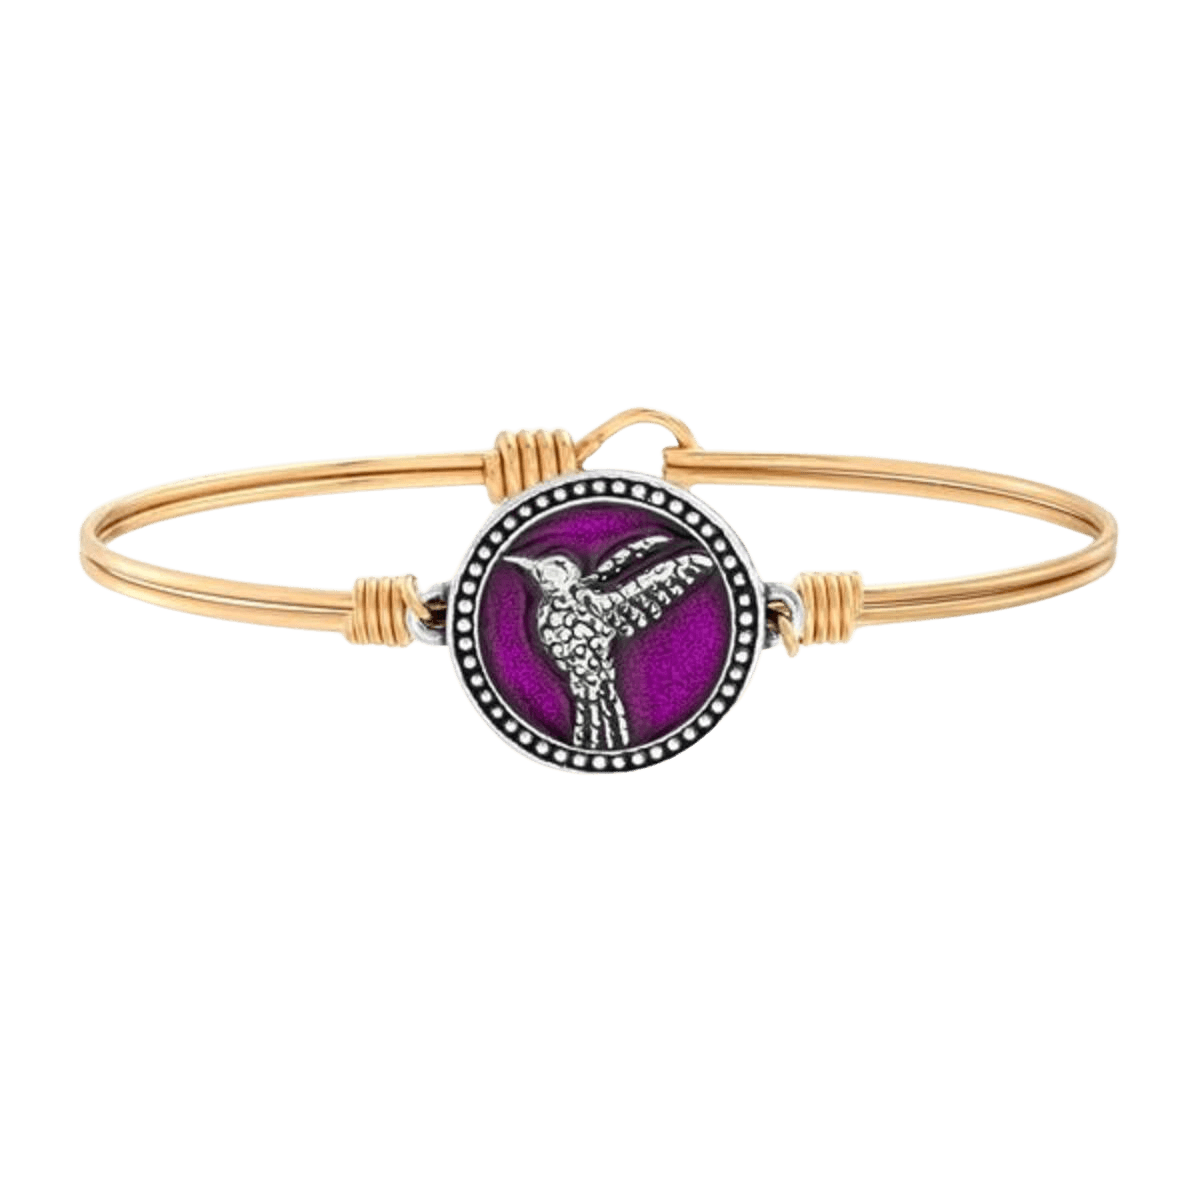 Luca + Danni Hummingbird Bangle (available in blue and purple) - Silver Parrot, Inc. 